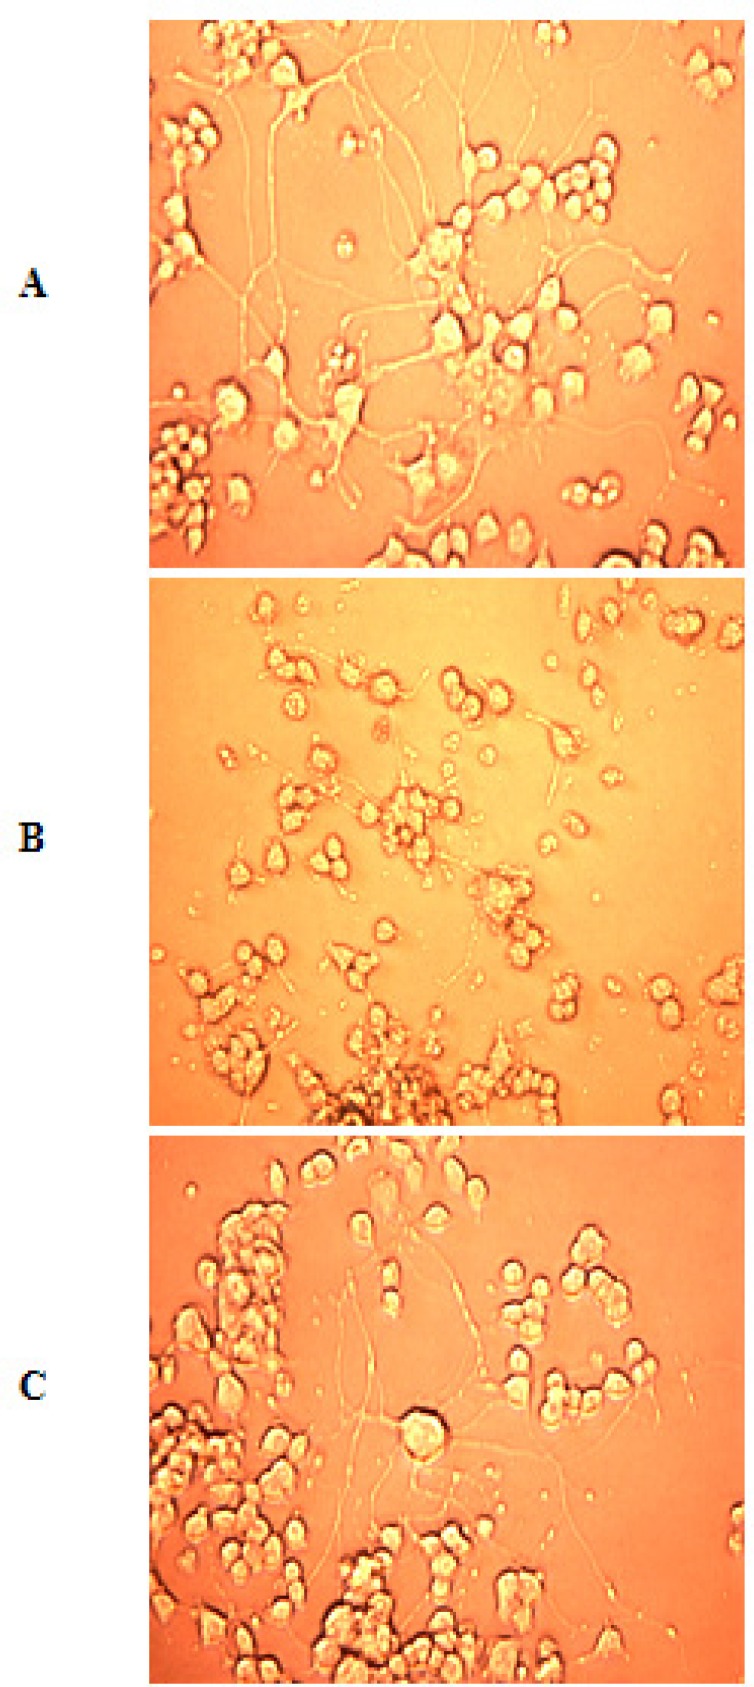 A = Normal differentiated PC12 cells showing normal morphology and neurite outgrowth. B = Ischemic cells showing neurite degeneration, disturbed cellular membrane and cell to cell contact. C = Protection of PC12 cells in the presence of F. arabica. (Images at 20X).